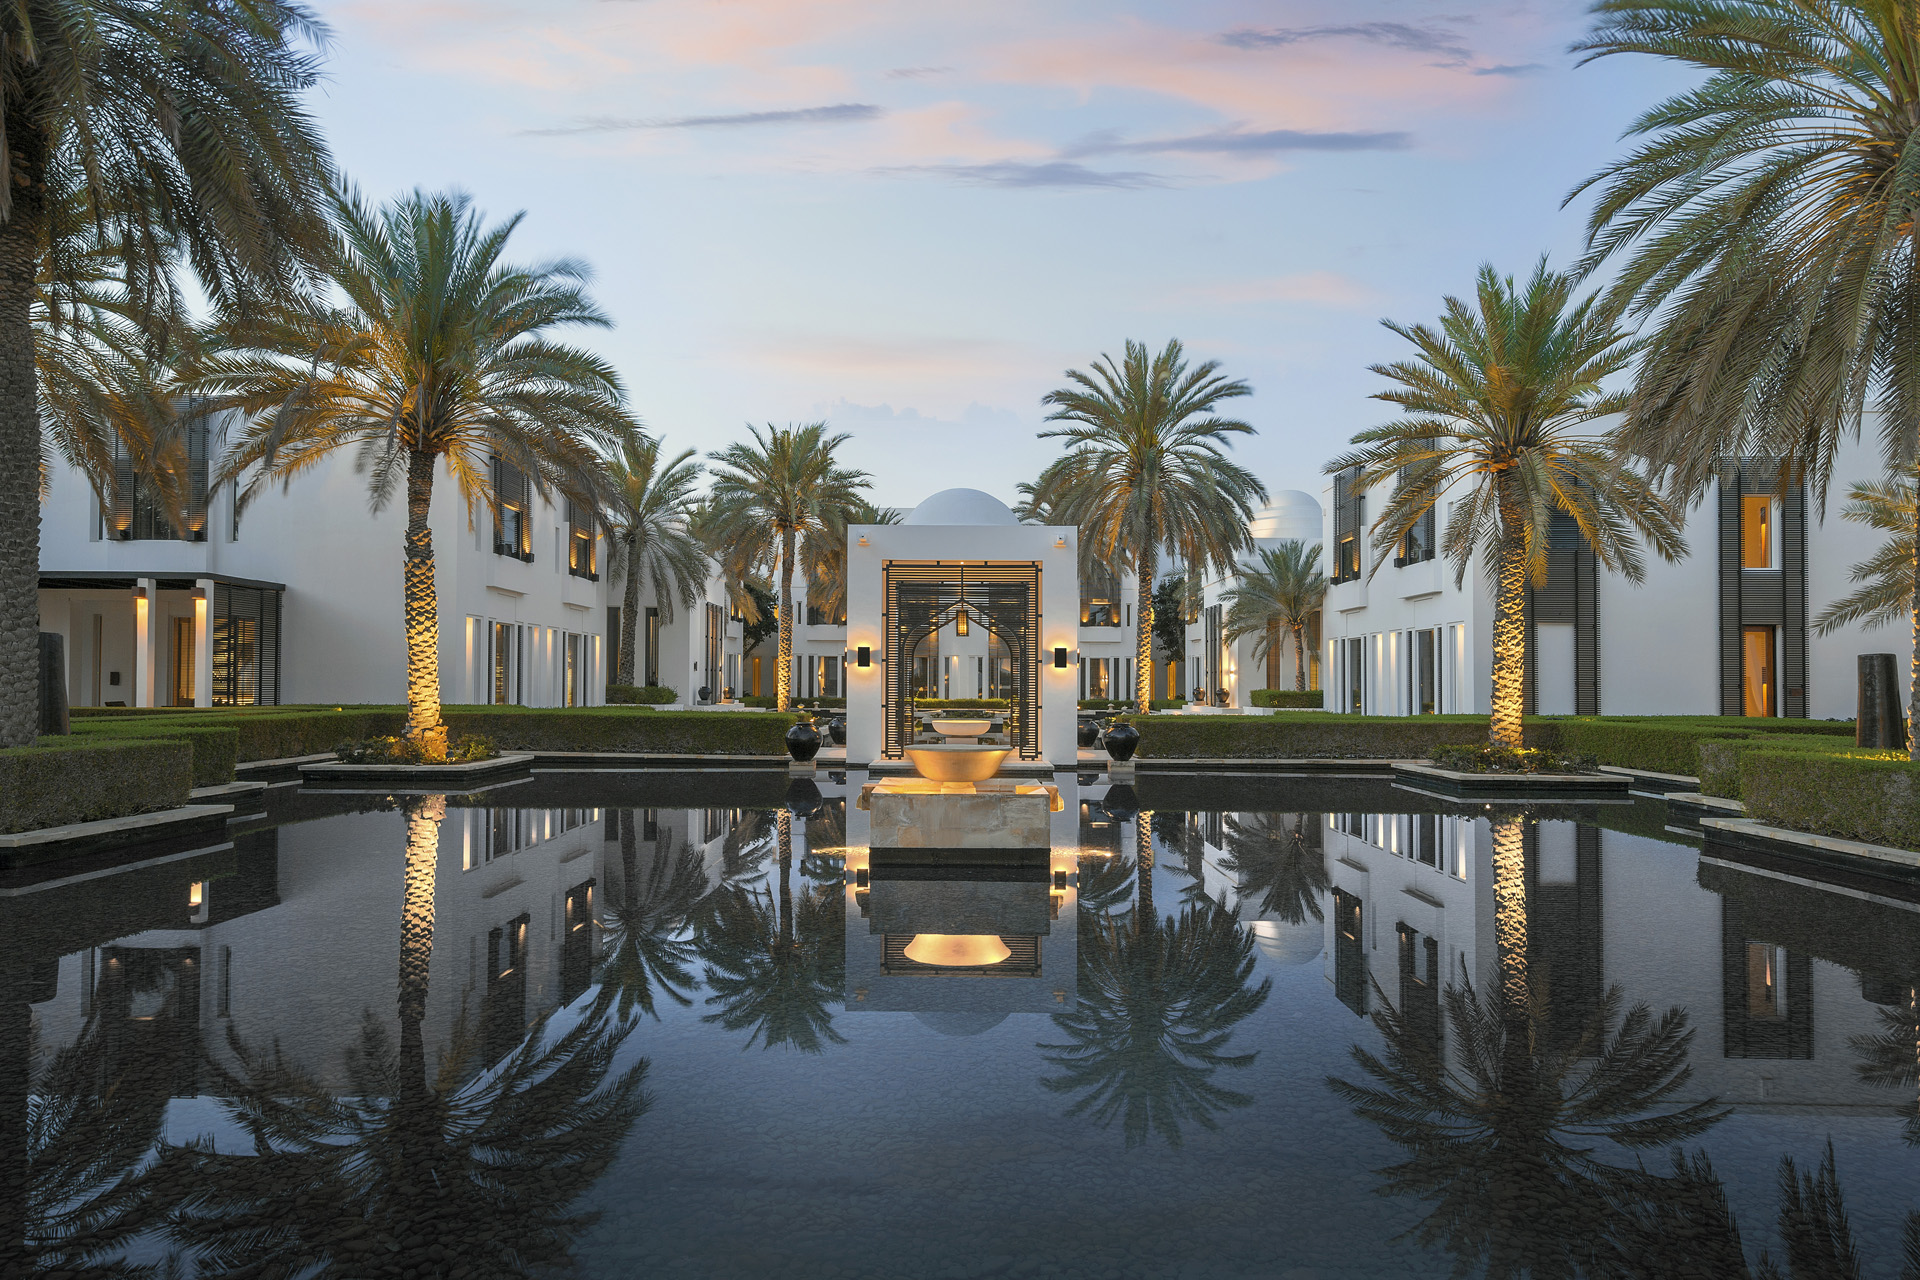 The Watergardens at The Chedi Muscat